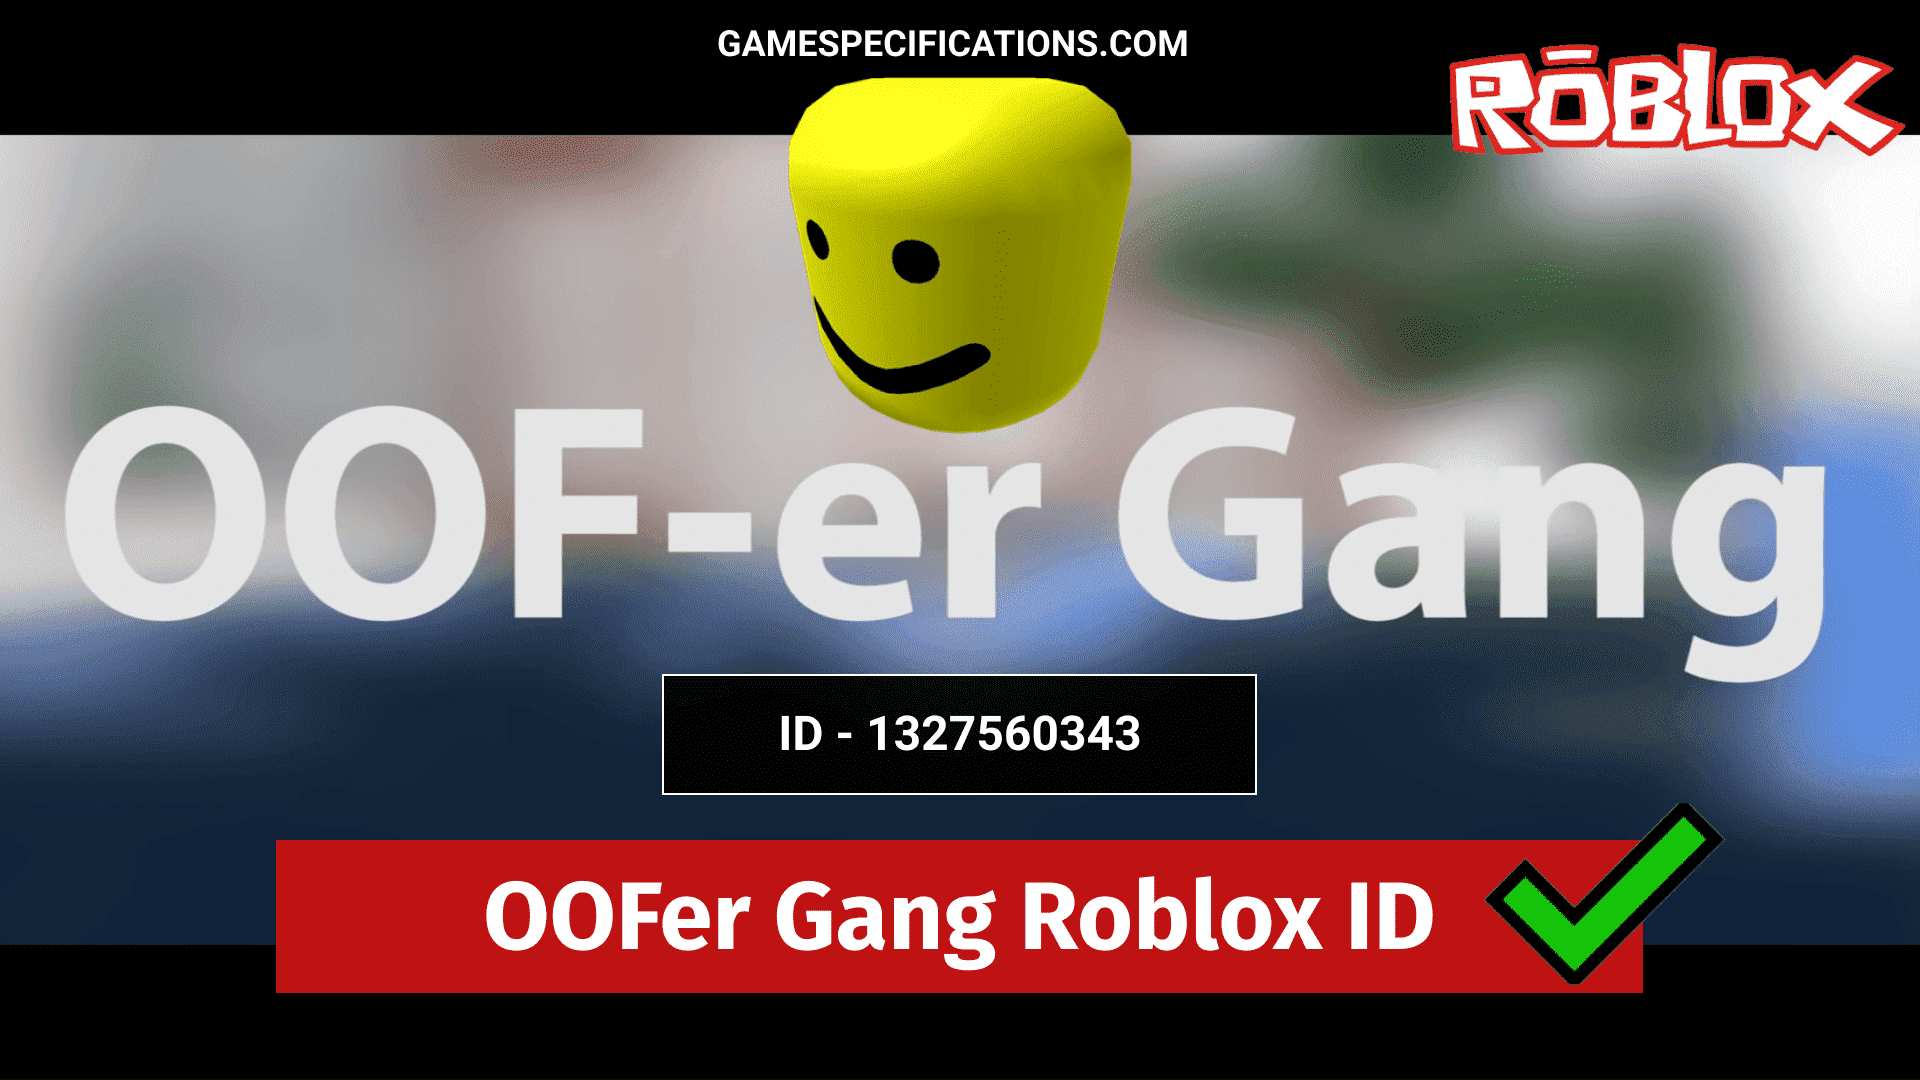 Oofer Gang Roblox Id Codes 2021 Game Specifications - roblox id codes